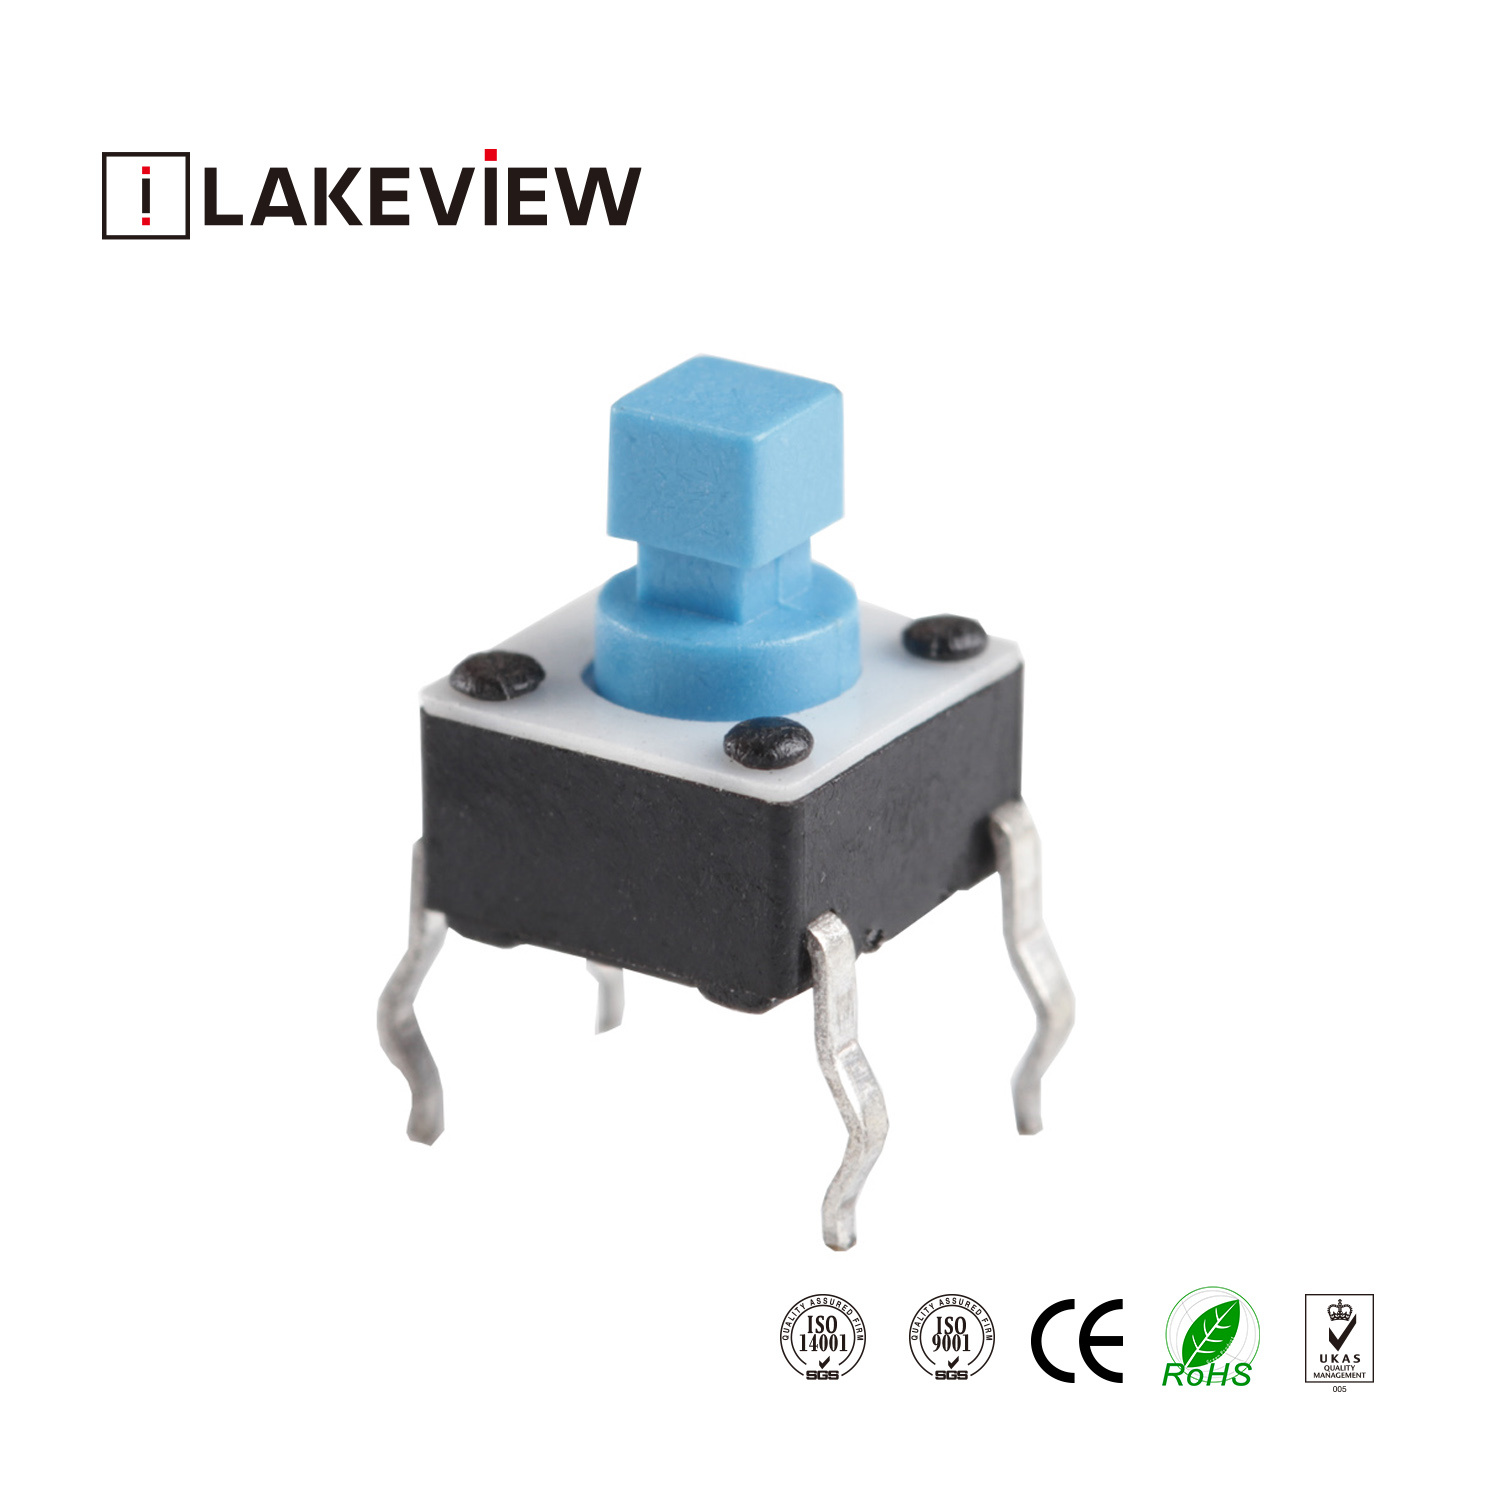 12mm Push Button Normally Closed Tact Switch Series